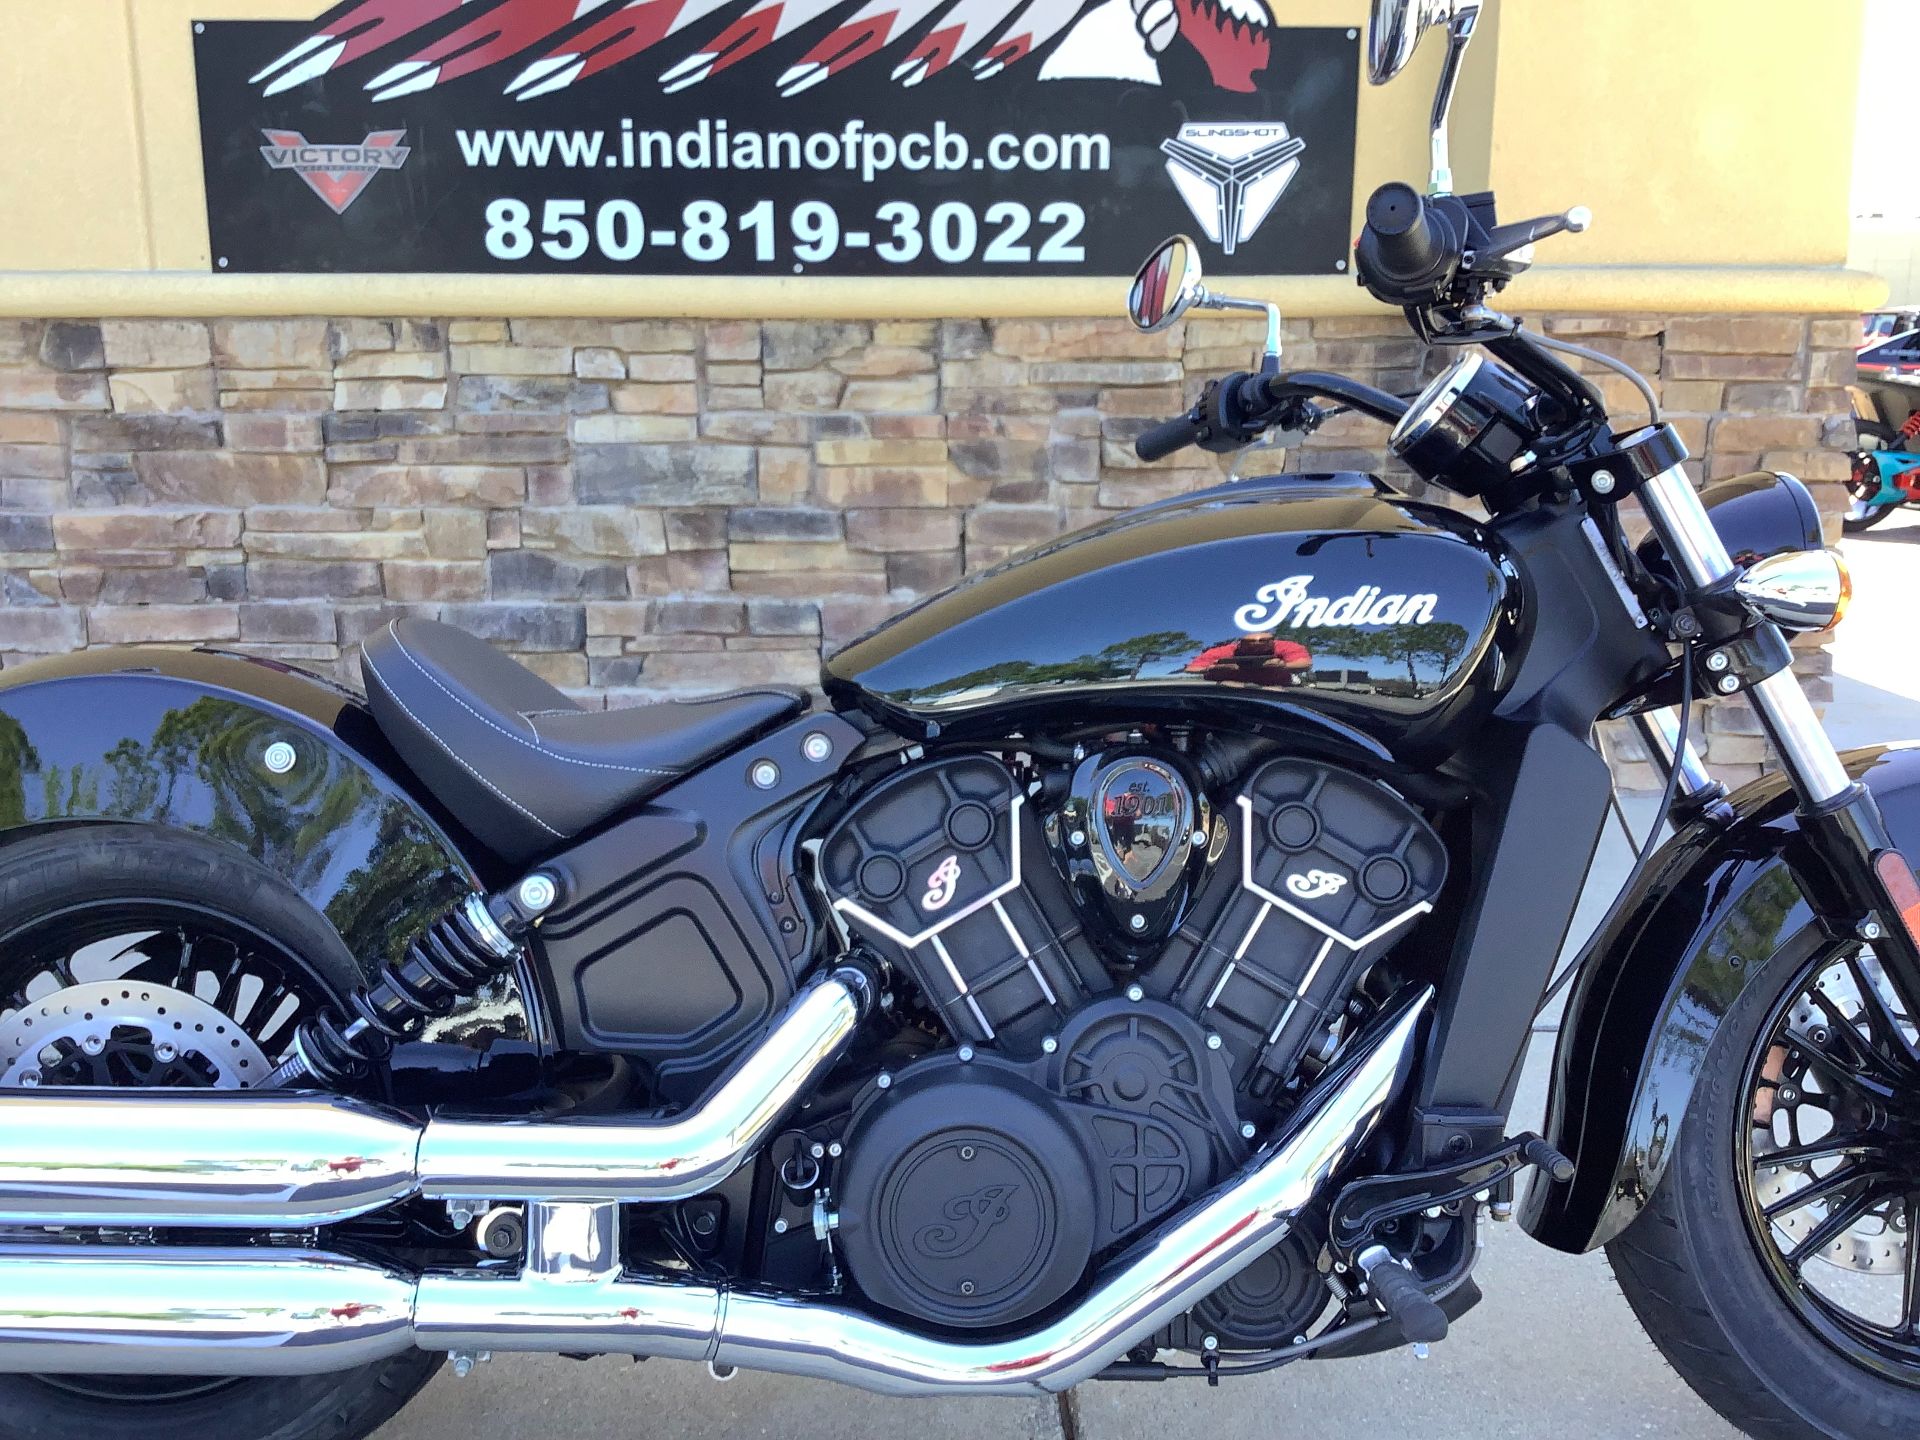 2022 Indian SCOUT 60 NON ABS in Panama City Beach, Florida - Photo 4